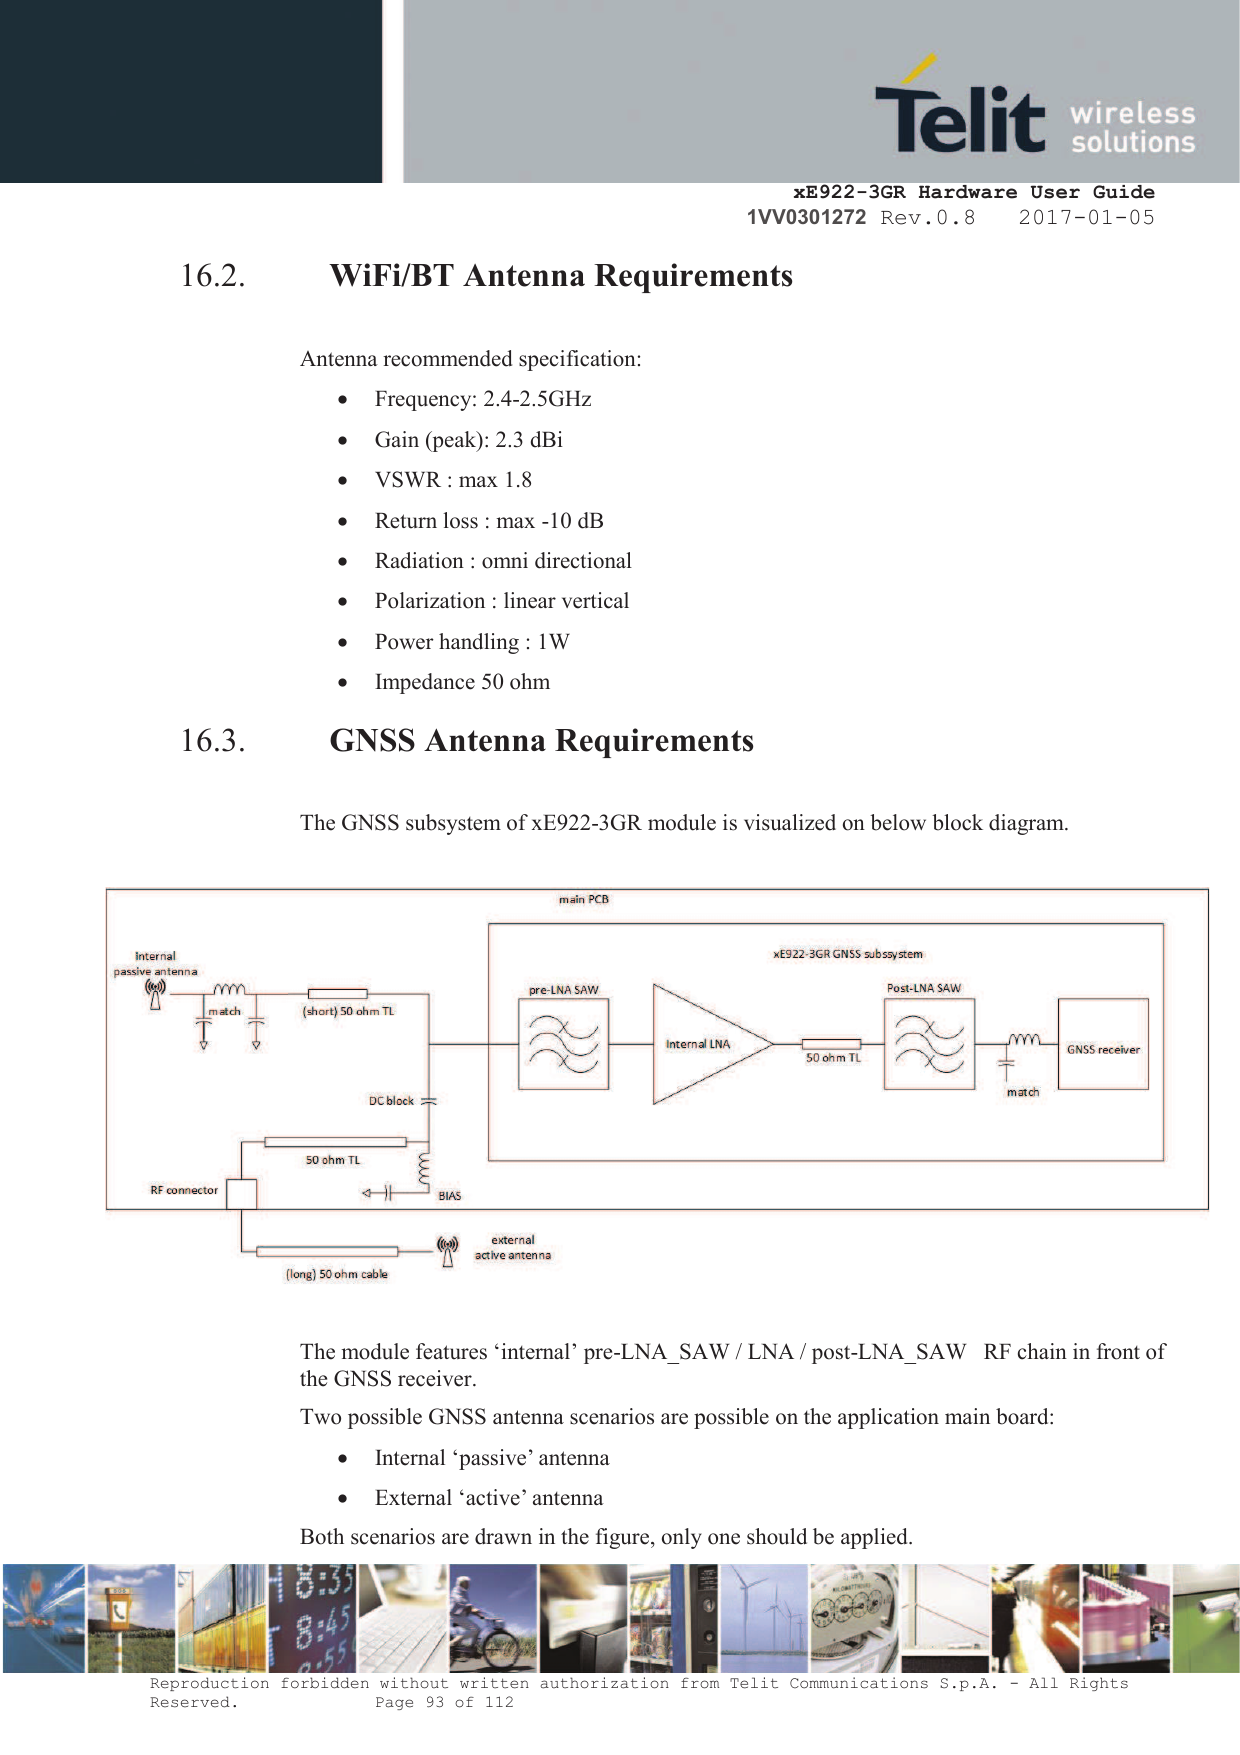     xE922-3GR Hardware User Guide 1VV0301272 Rev.0.8   2017-01-05 Reproduction forbidden without written authorization from Telit Communications S.p.A. - All Rights Reserved.    Page 93 of 112  16.2. WiFi/BT Antenna Requirements   Antenna recommended specification: · Frequency: 2.4-2.5GHz · Gain (peak): 2.3 dBi · VSWR : max 1.8 · Return loss : max -10 dB · Radiation : omni directional  · Polarization : linear vertical  · Power handling : 1W · Impedance 50 ohm 16.3. GNSS Antenna Requirements  The GNSS subsystem of xE922-3GR module is visualized on below block diagram.    The module features ‘internal’ pre-LNA_SAW / LNA / post-LNA_SAW   RF chain in front of the GNSS receiver. Two possible GNSS antenna scenarios are possible on the application main board: · Internal ‘passive’ antenna · External ‘active’ antenna Both scenarios are drawn in the figure, only one should be applied. 